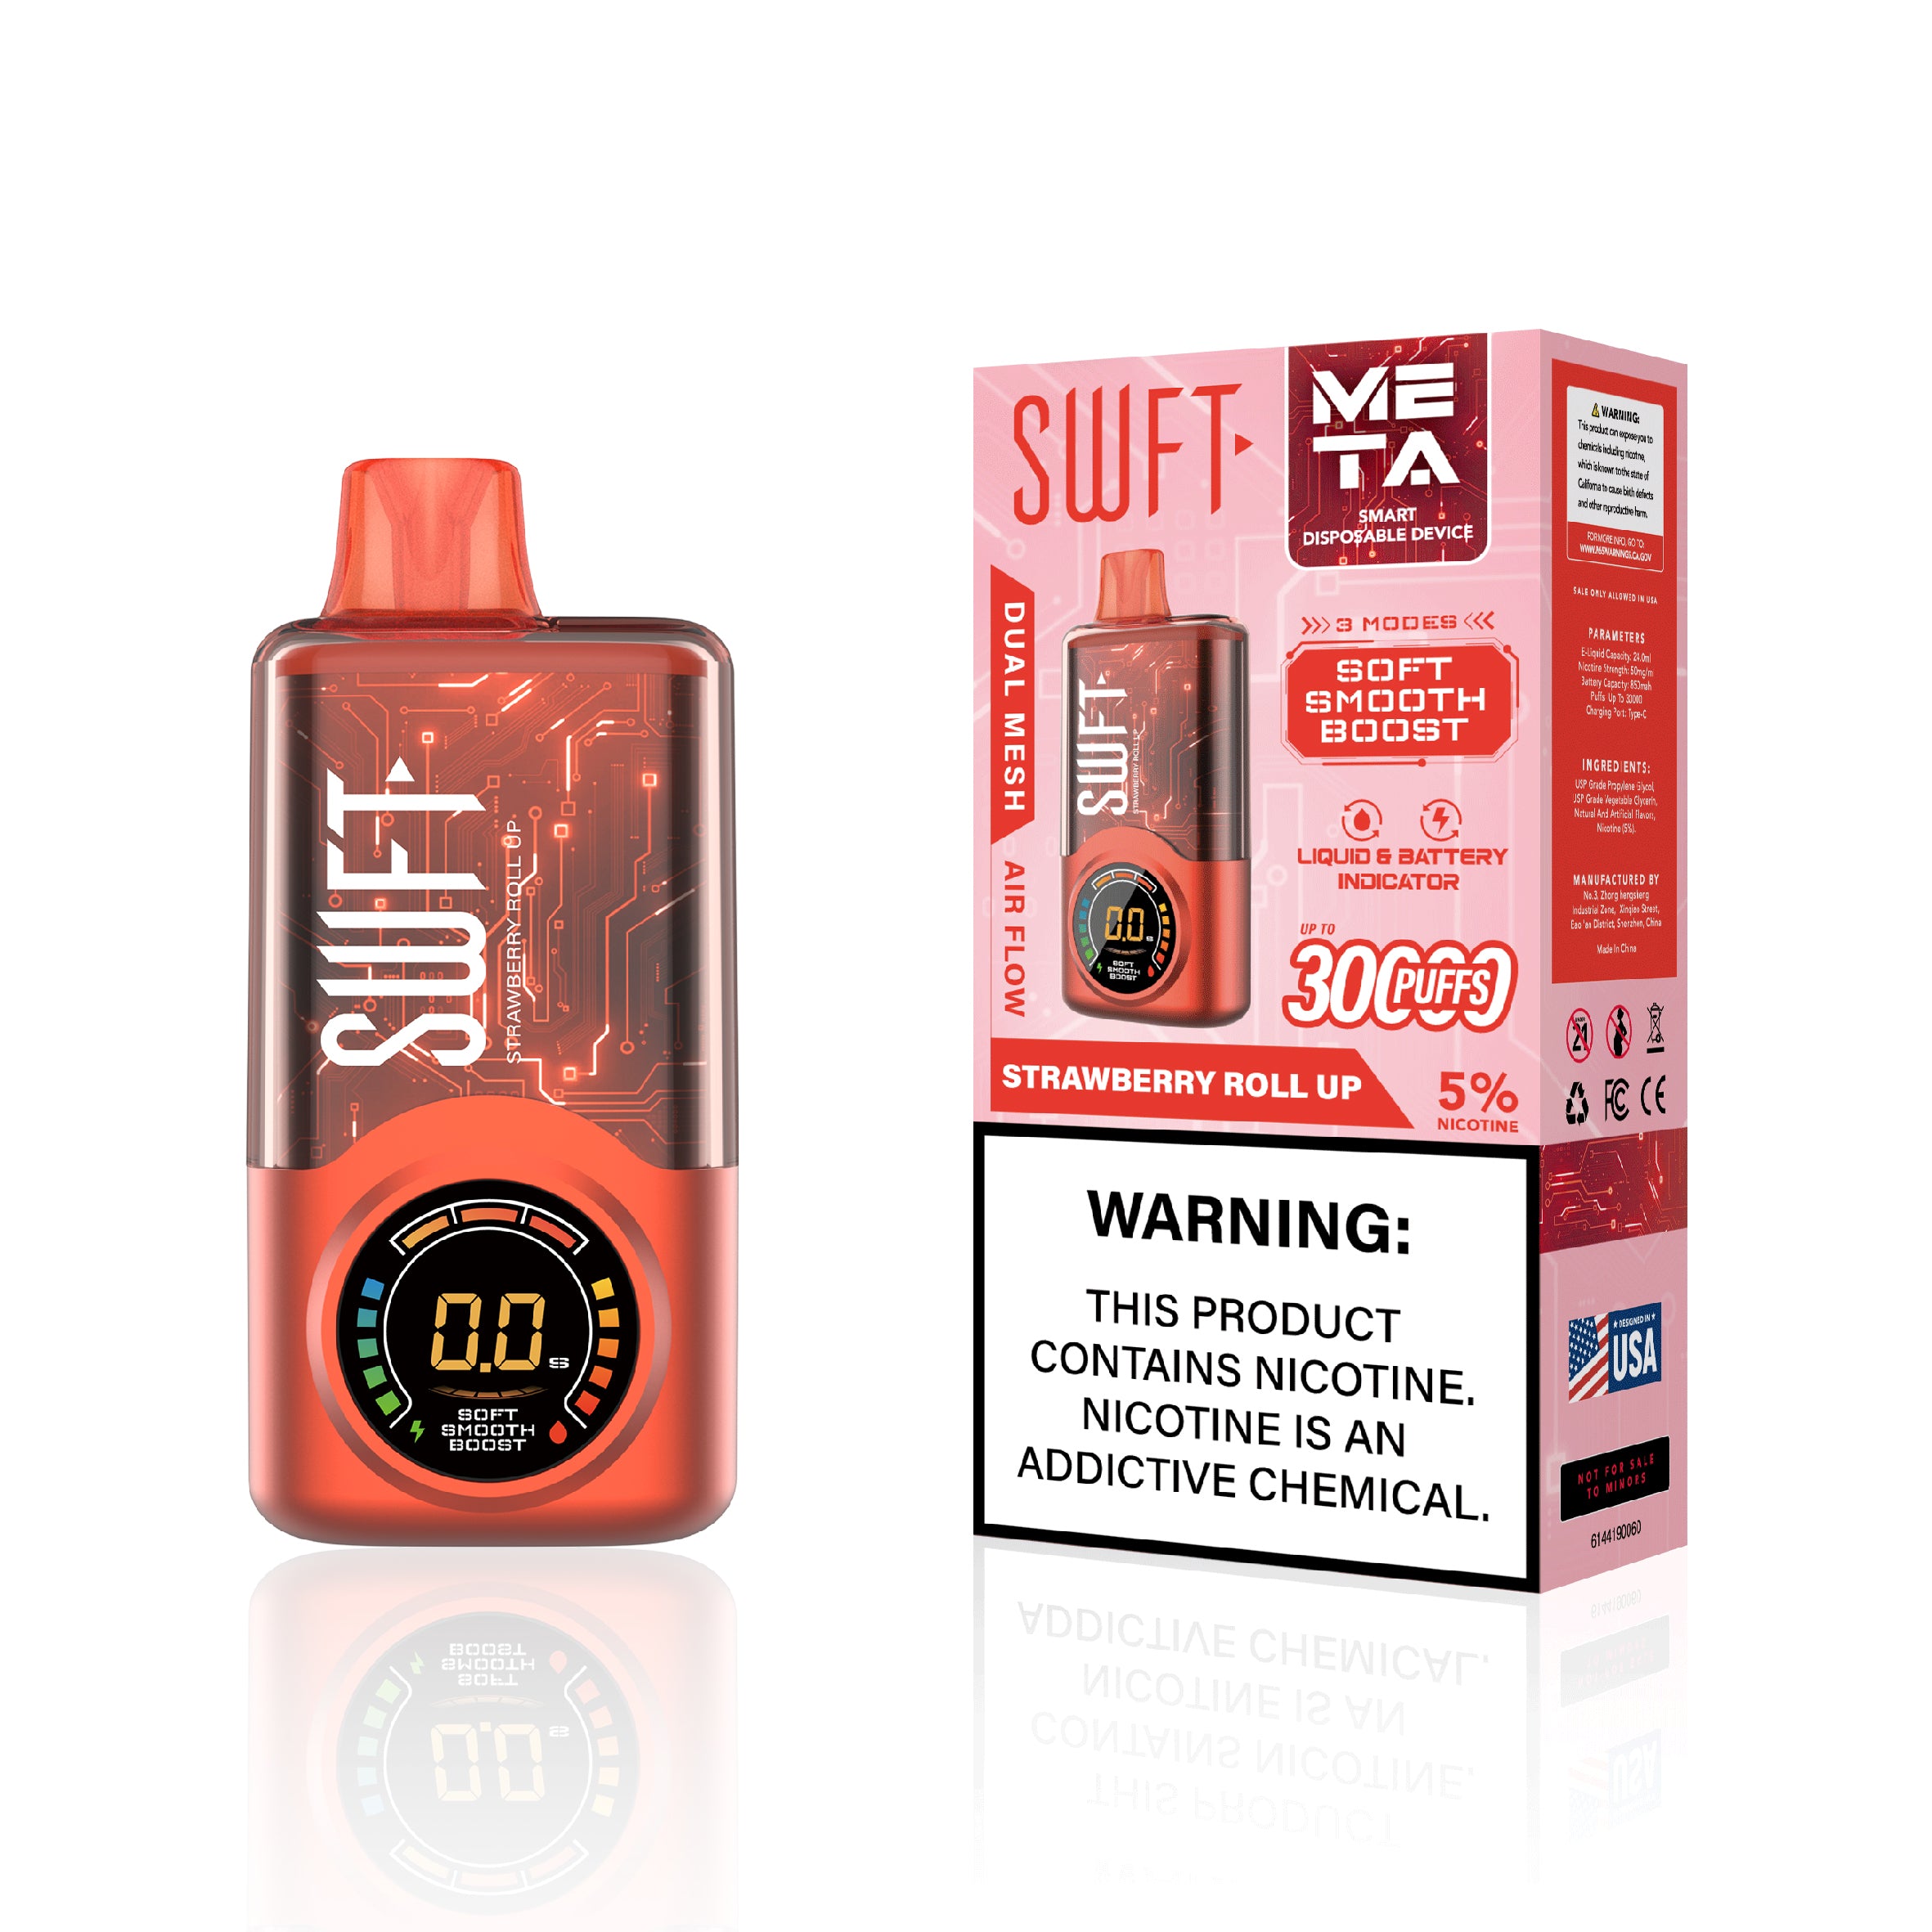 SWFT META 30000 PUFFS ADJUSTABLE WATTAGE DISPOSABLE VAPE DEVICE DUAL MESH COIL LIQUID AND BATTERY INDICATOR STRAWBERRY ROLL UP